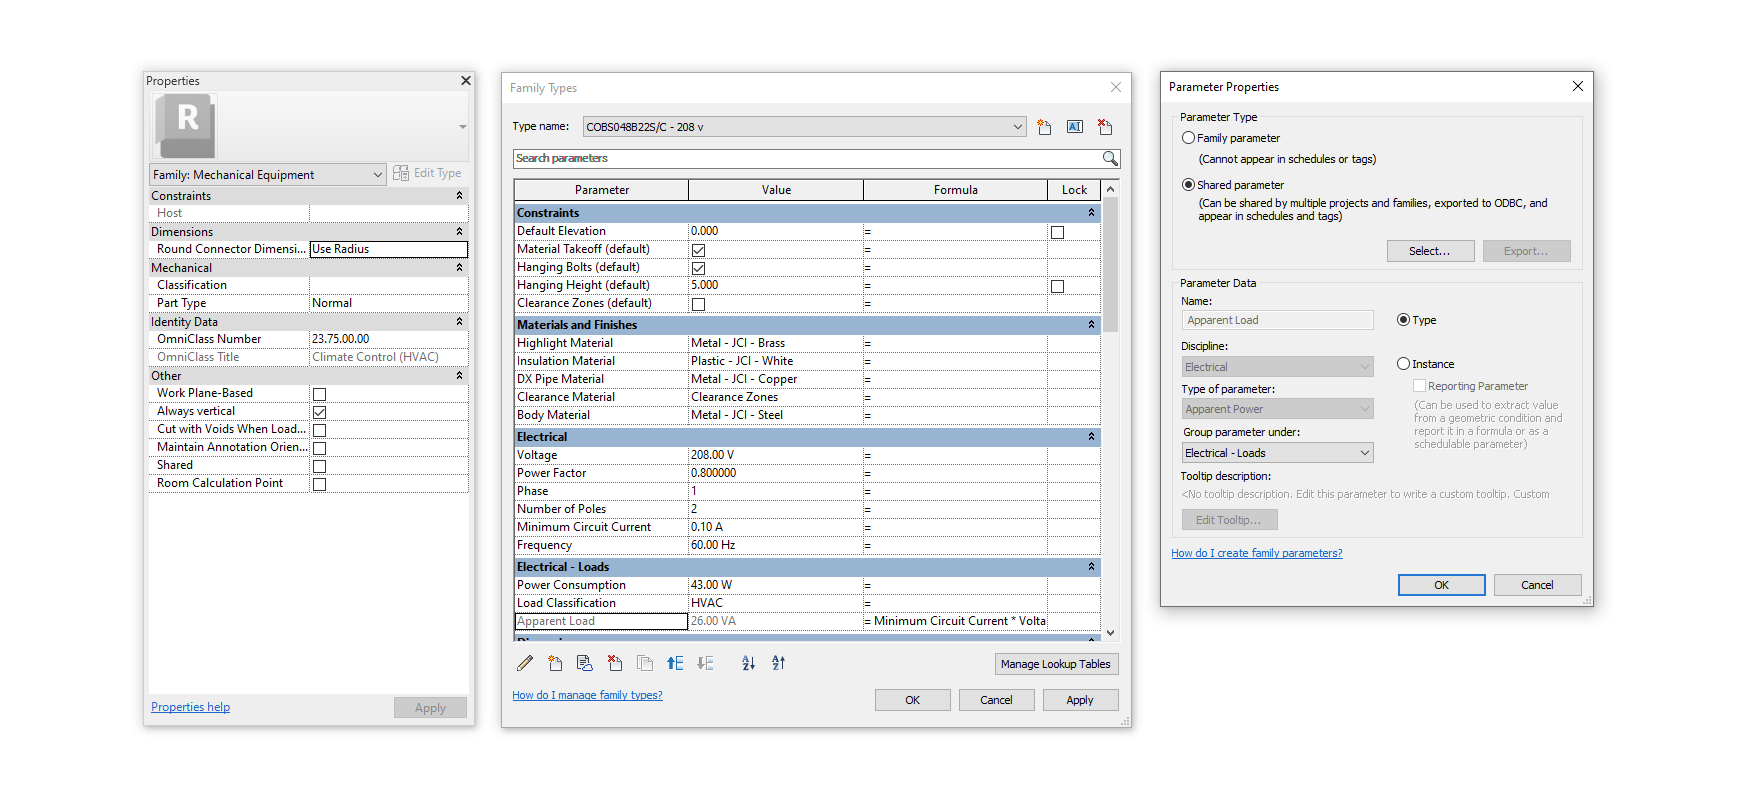 Revit dialogs for viewing and managing family parameters.